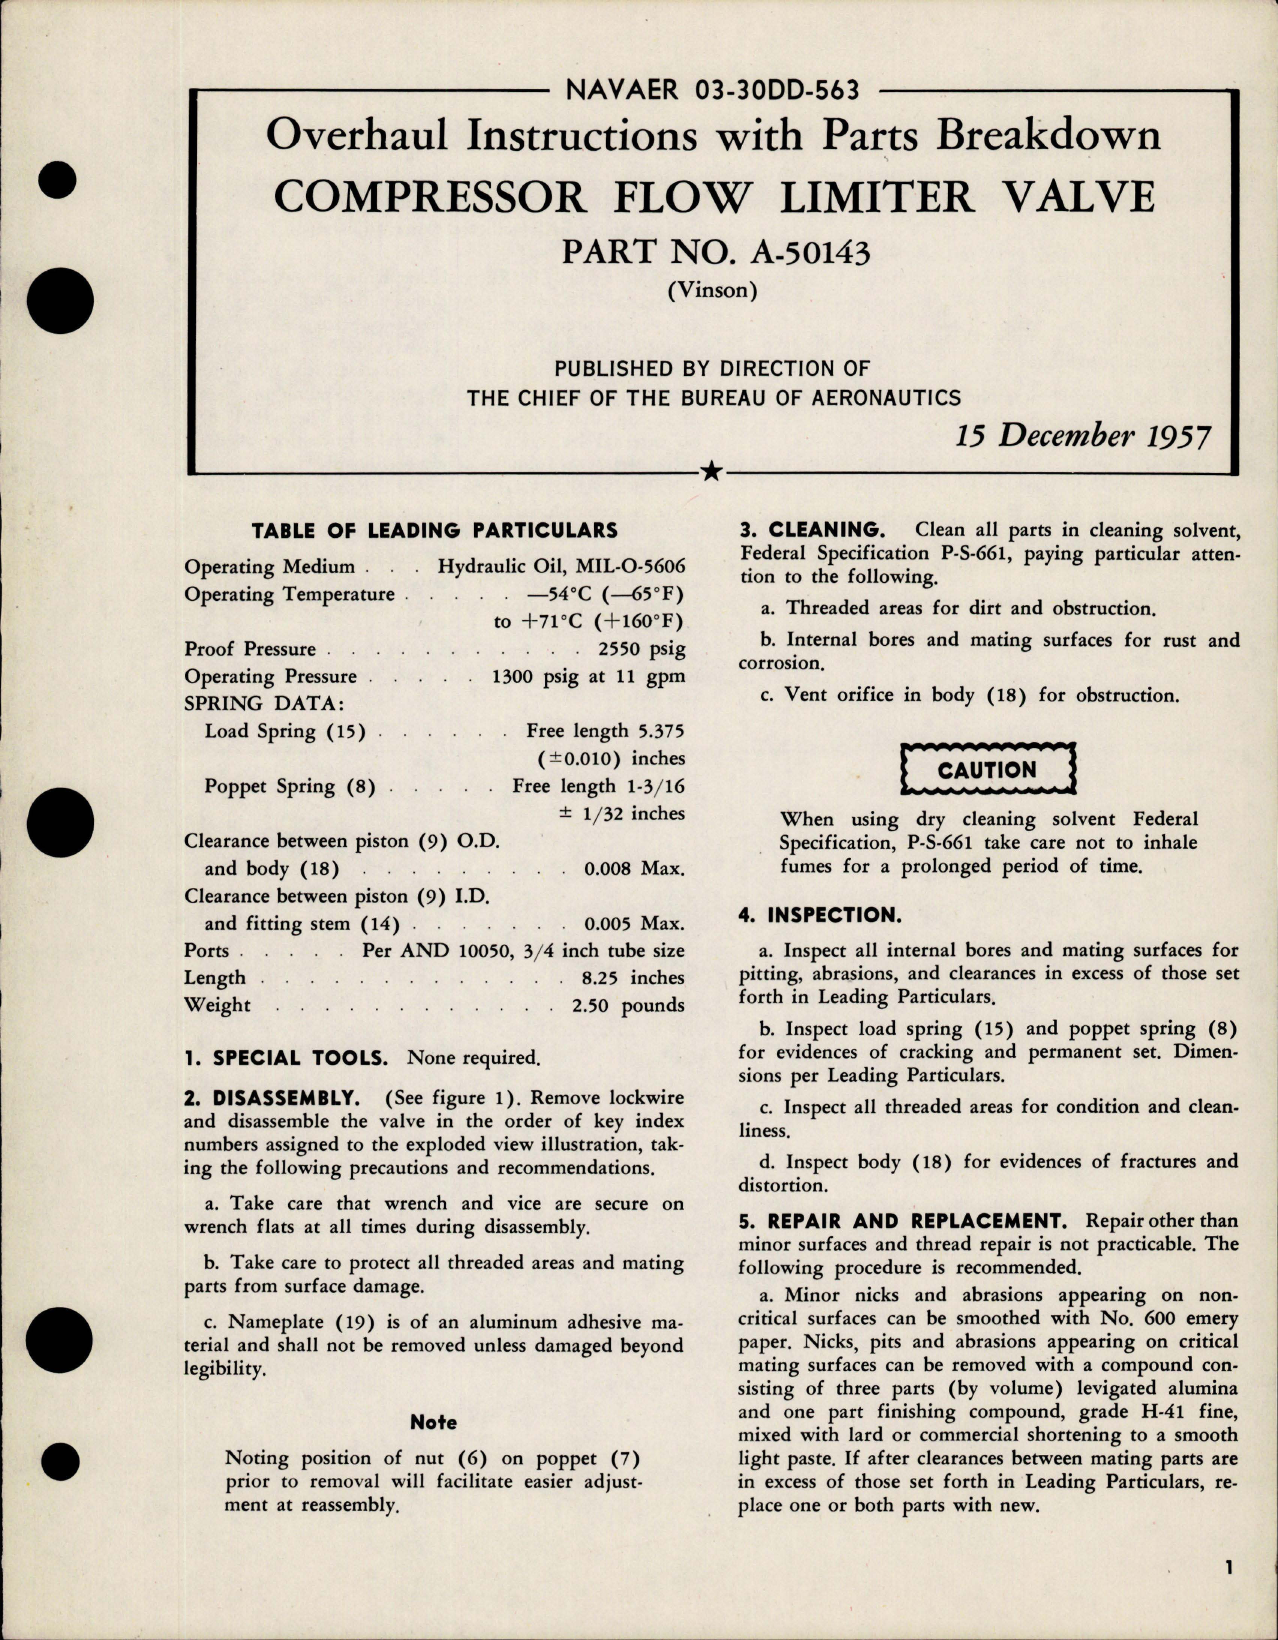 Sample page 1 from AirCorps Library document: Overhaul Instructions with Parts for Compressor Flow Limiter Valve - Part A-50143 